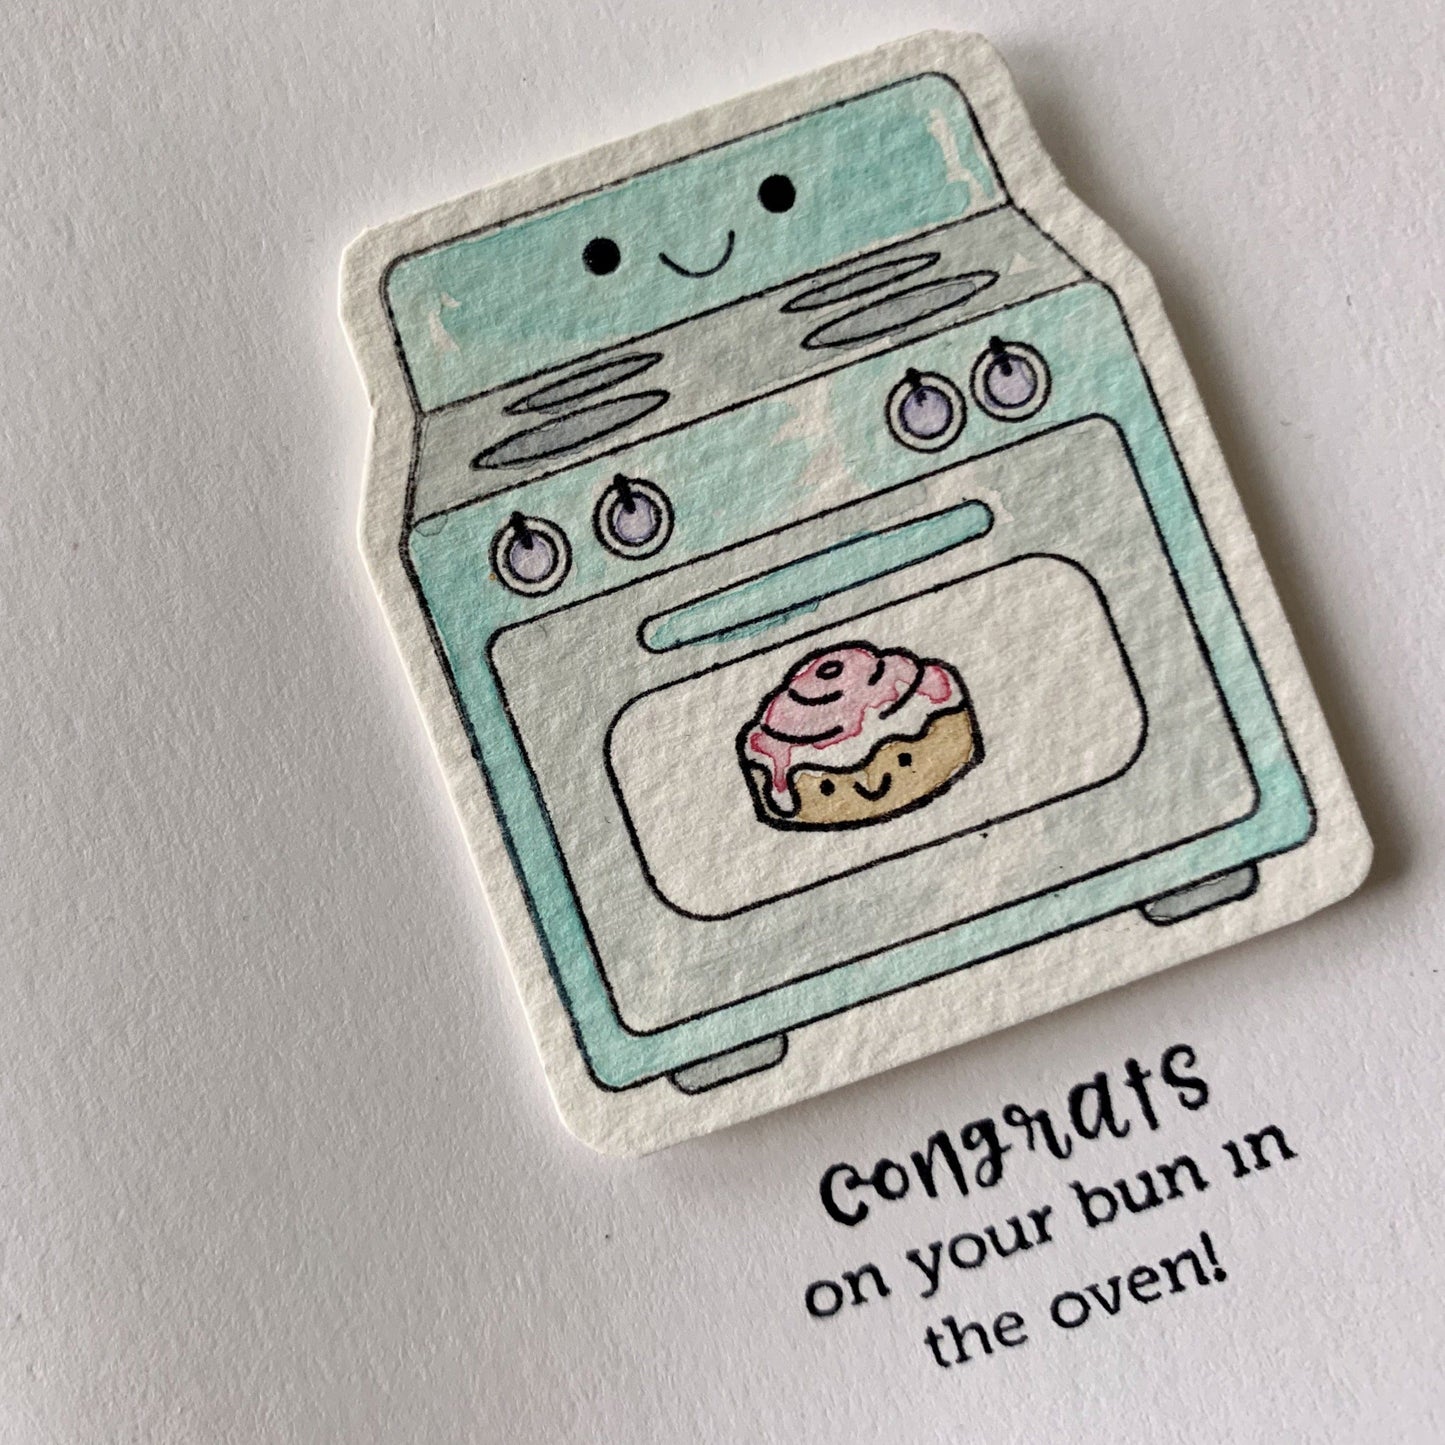 The bun in the oven card. Baby shower card.